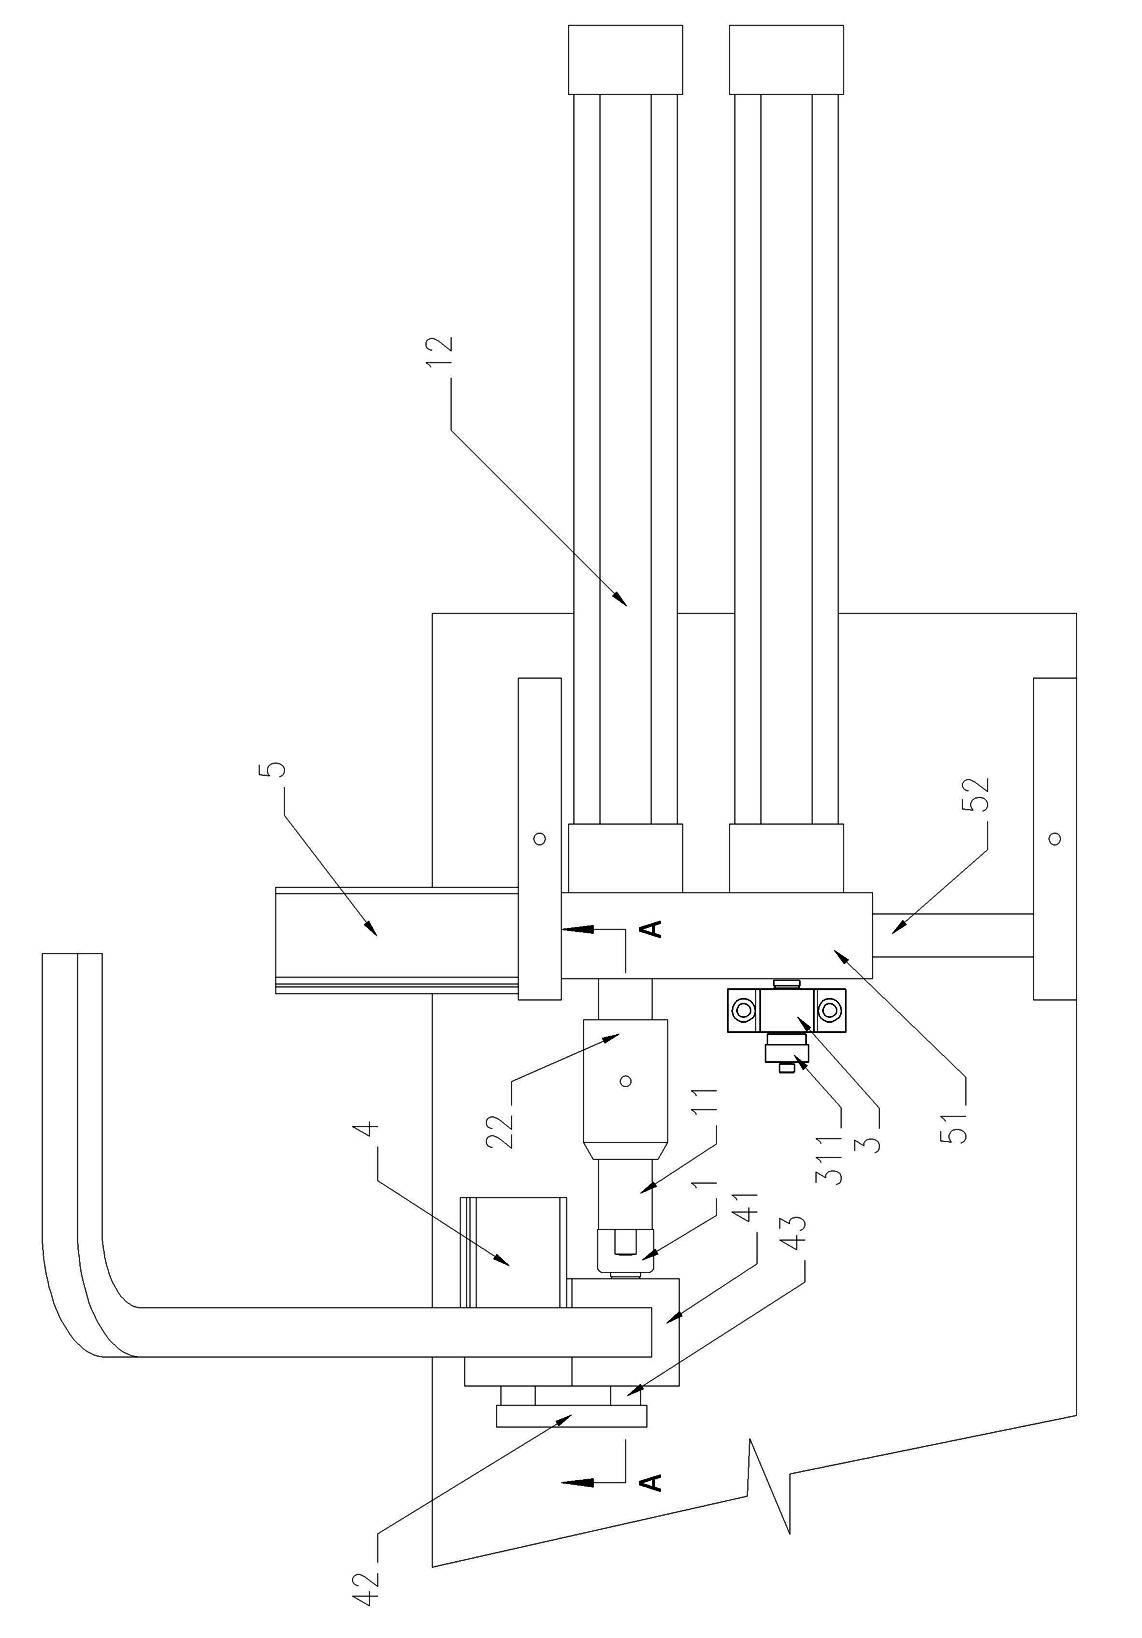 Active sleeve-withdrawing device for hose assembling machine